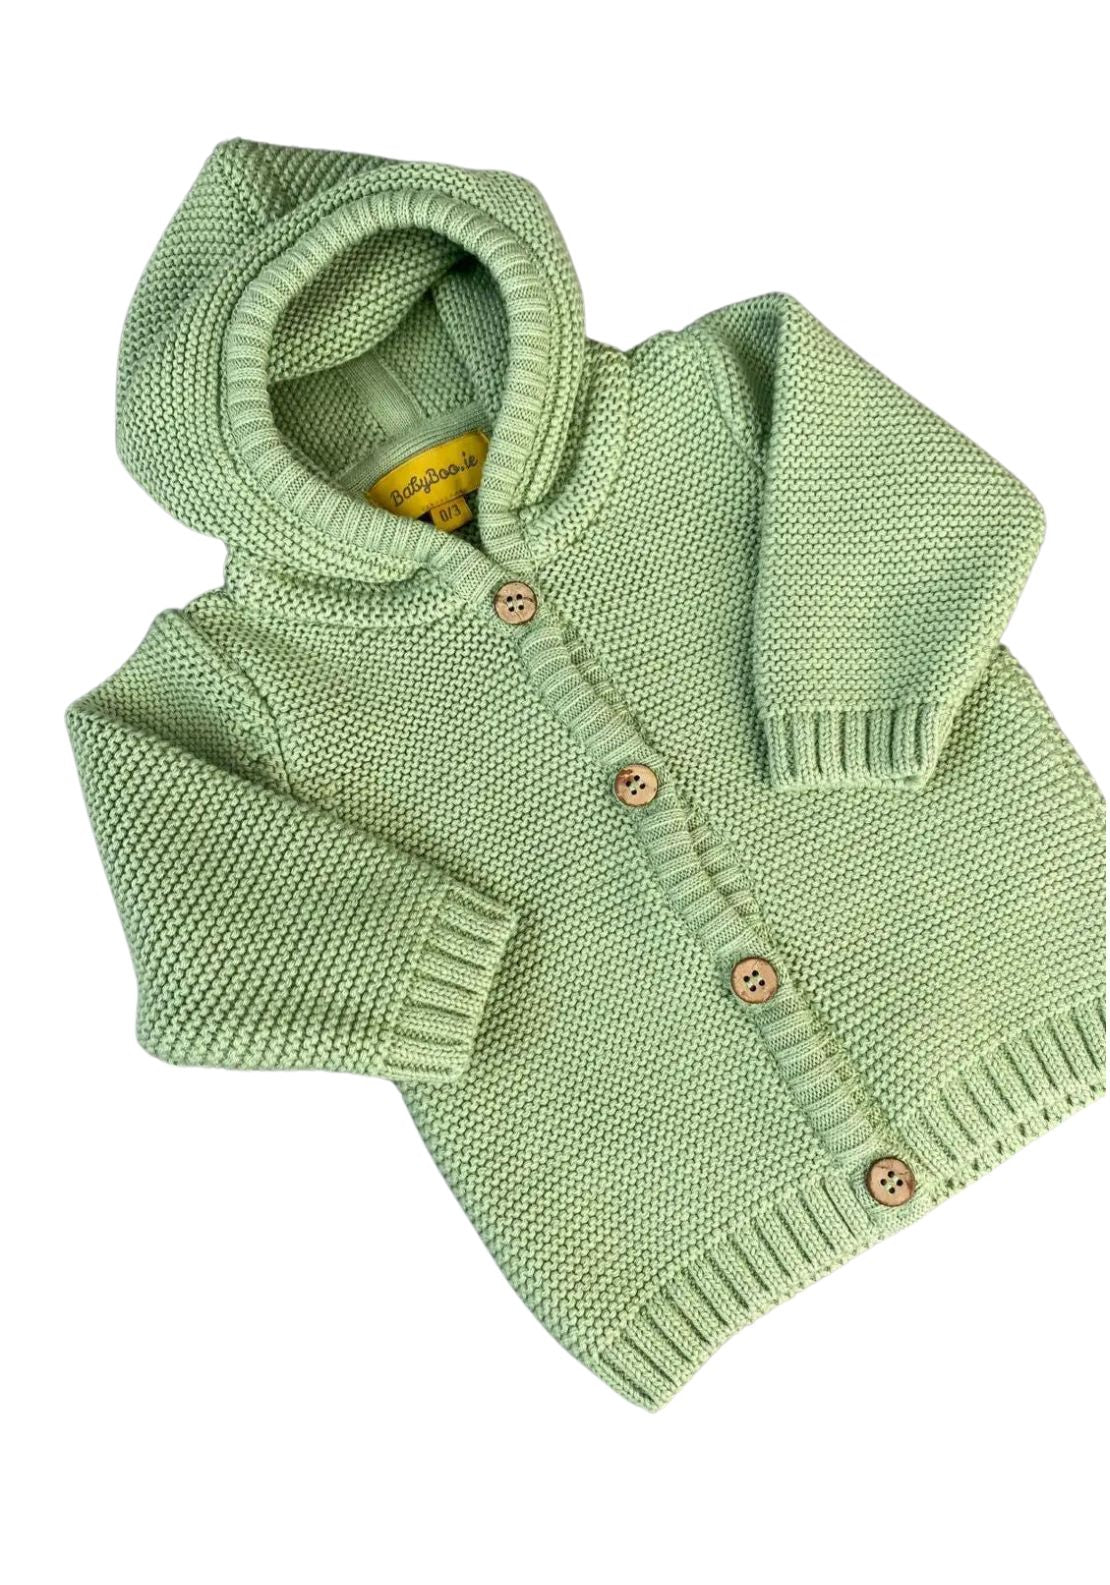 Babyboo Hooded Cardigan 1 Shaws Department Stores